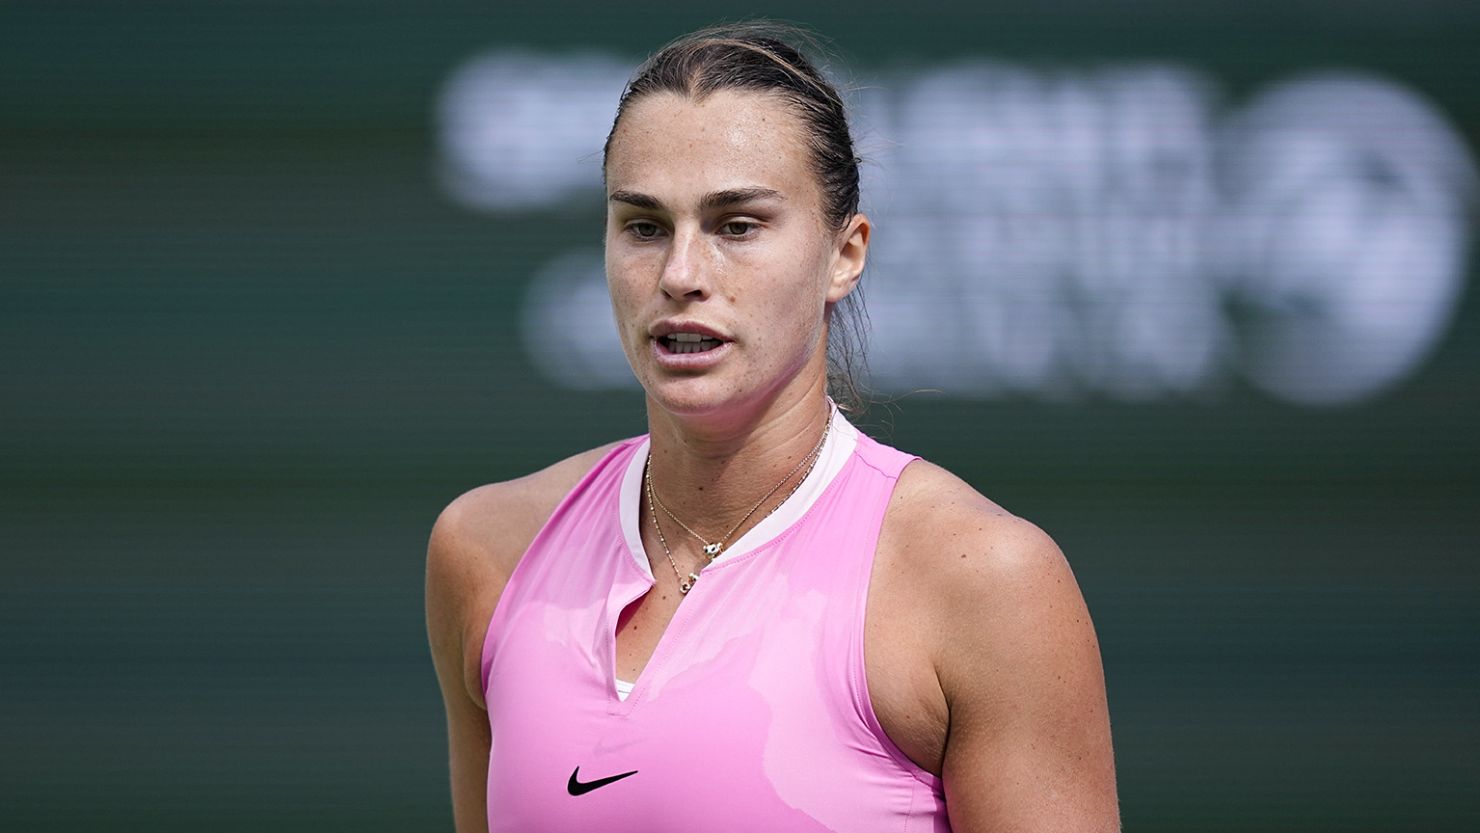 Aryna Sabalenka is scheduled to play in the Miami Open following the death of her ex-boyfriend.